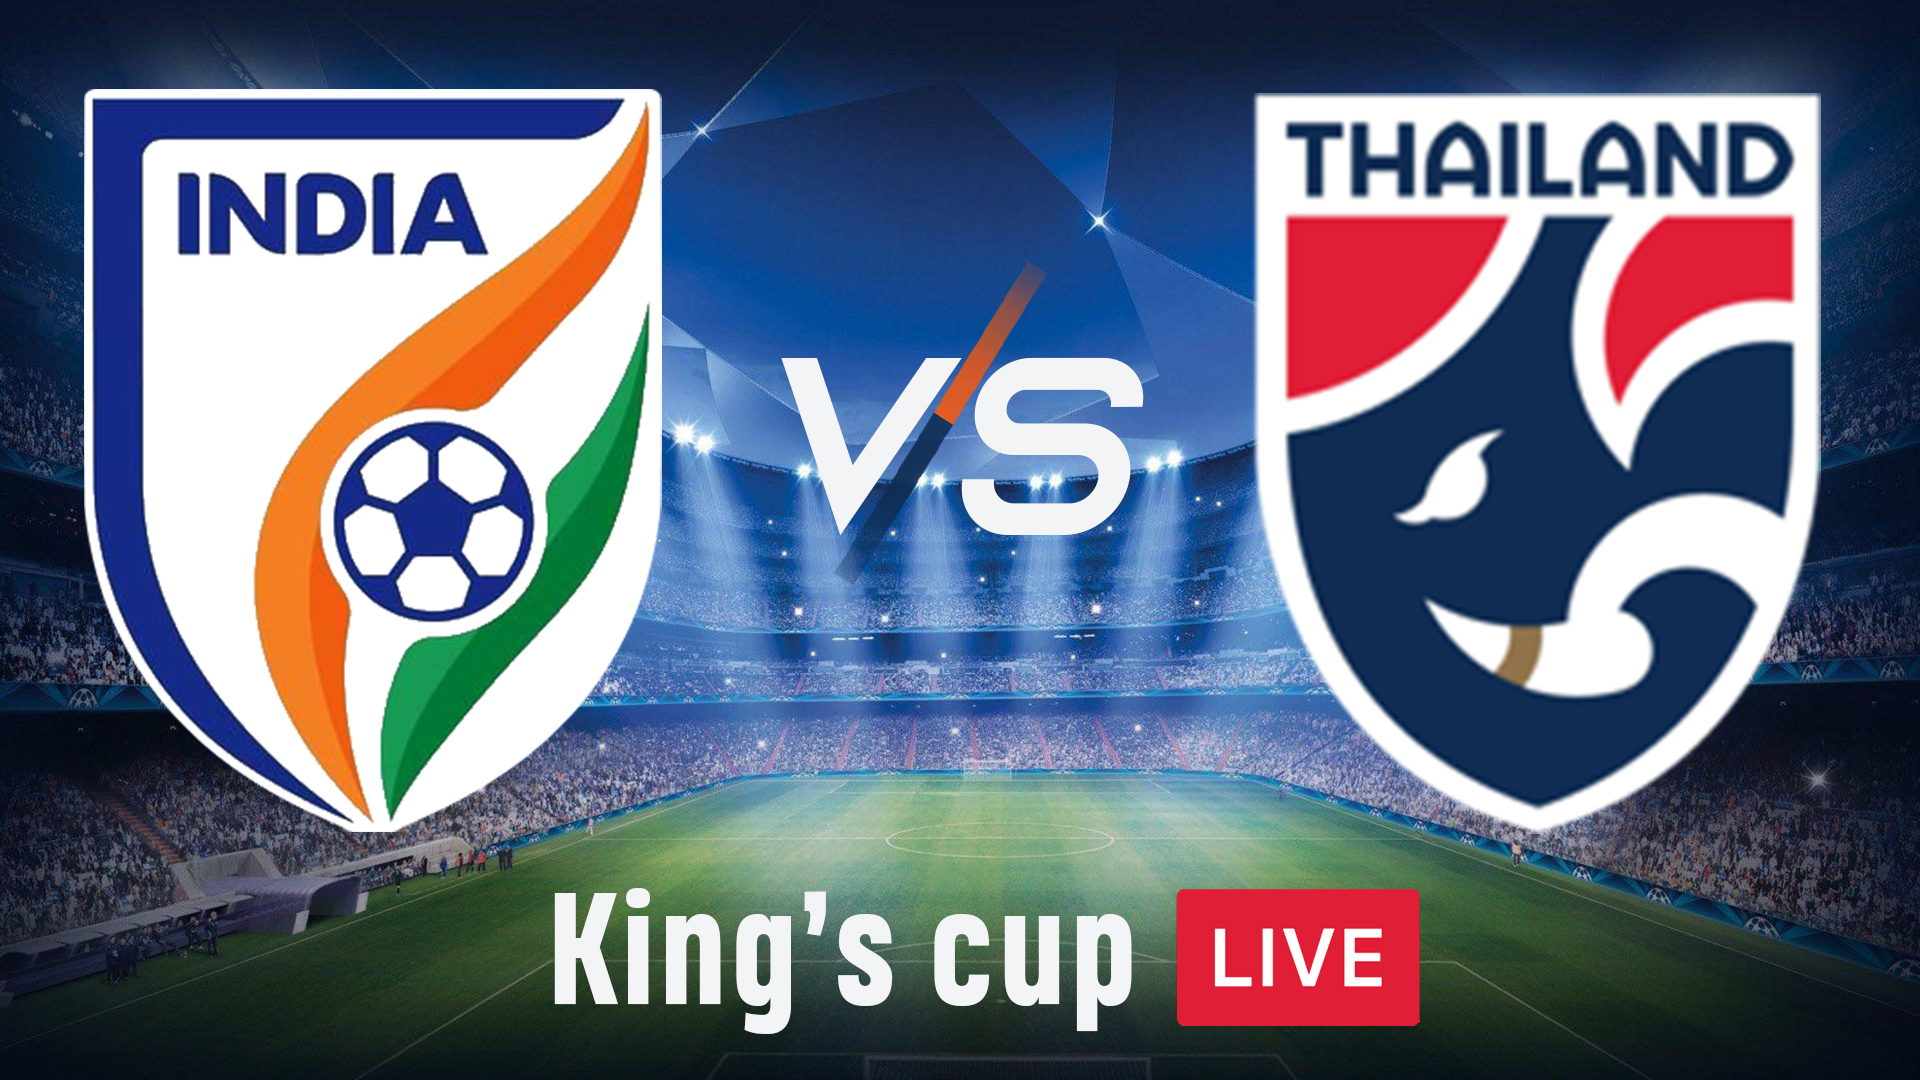 India vs Thailand King's Cup Live IND Lead 10, THA Attack